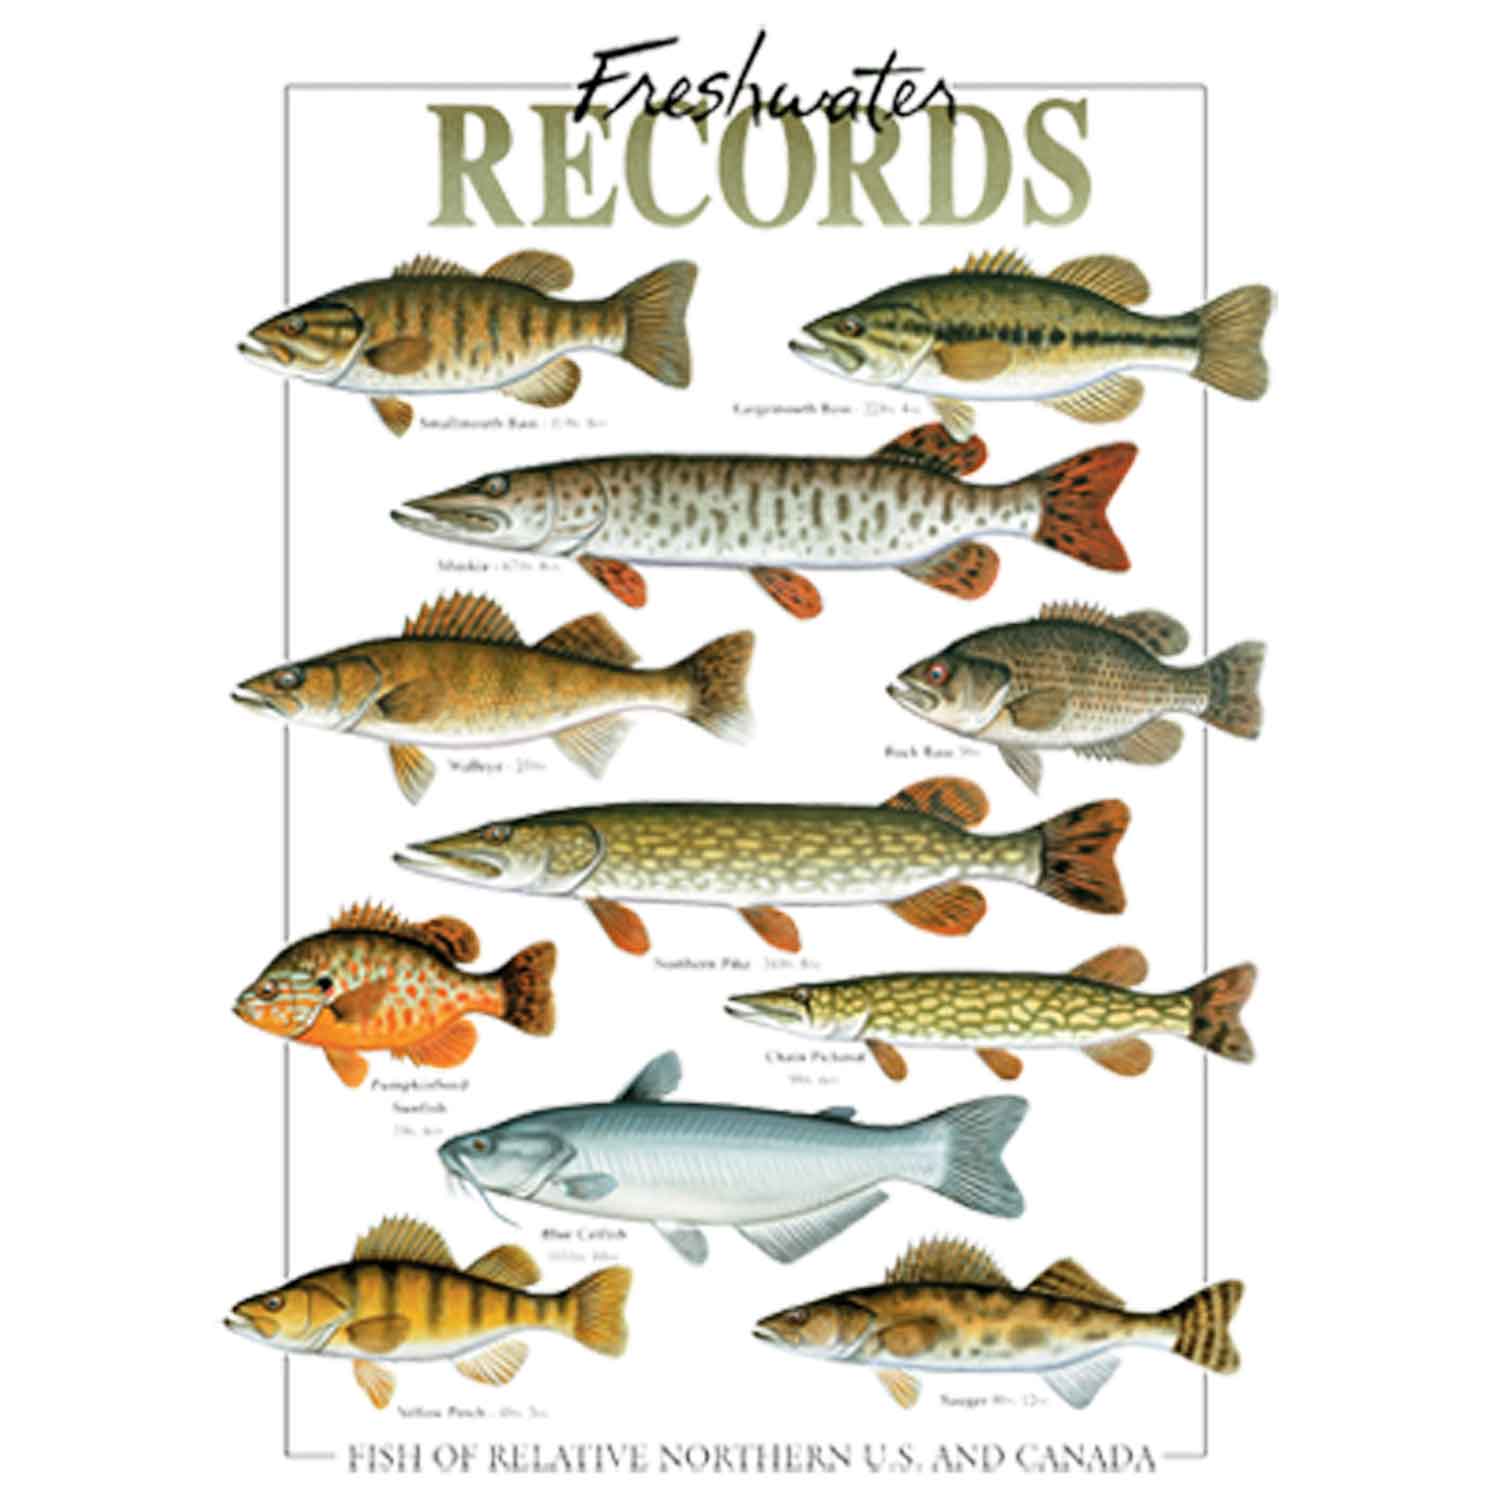 Freshwater Records Printed T-Shirt-White